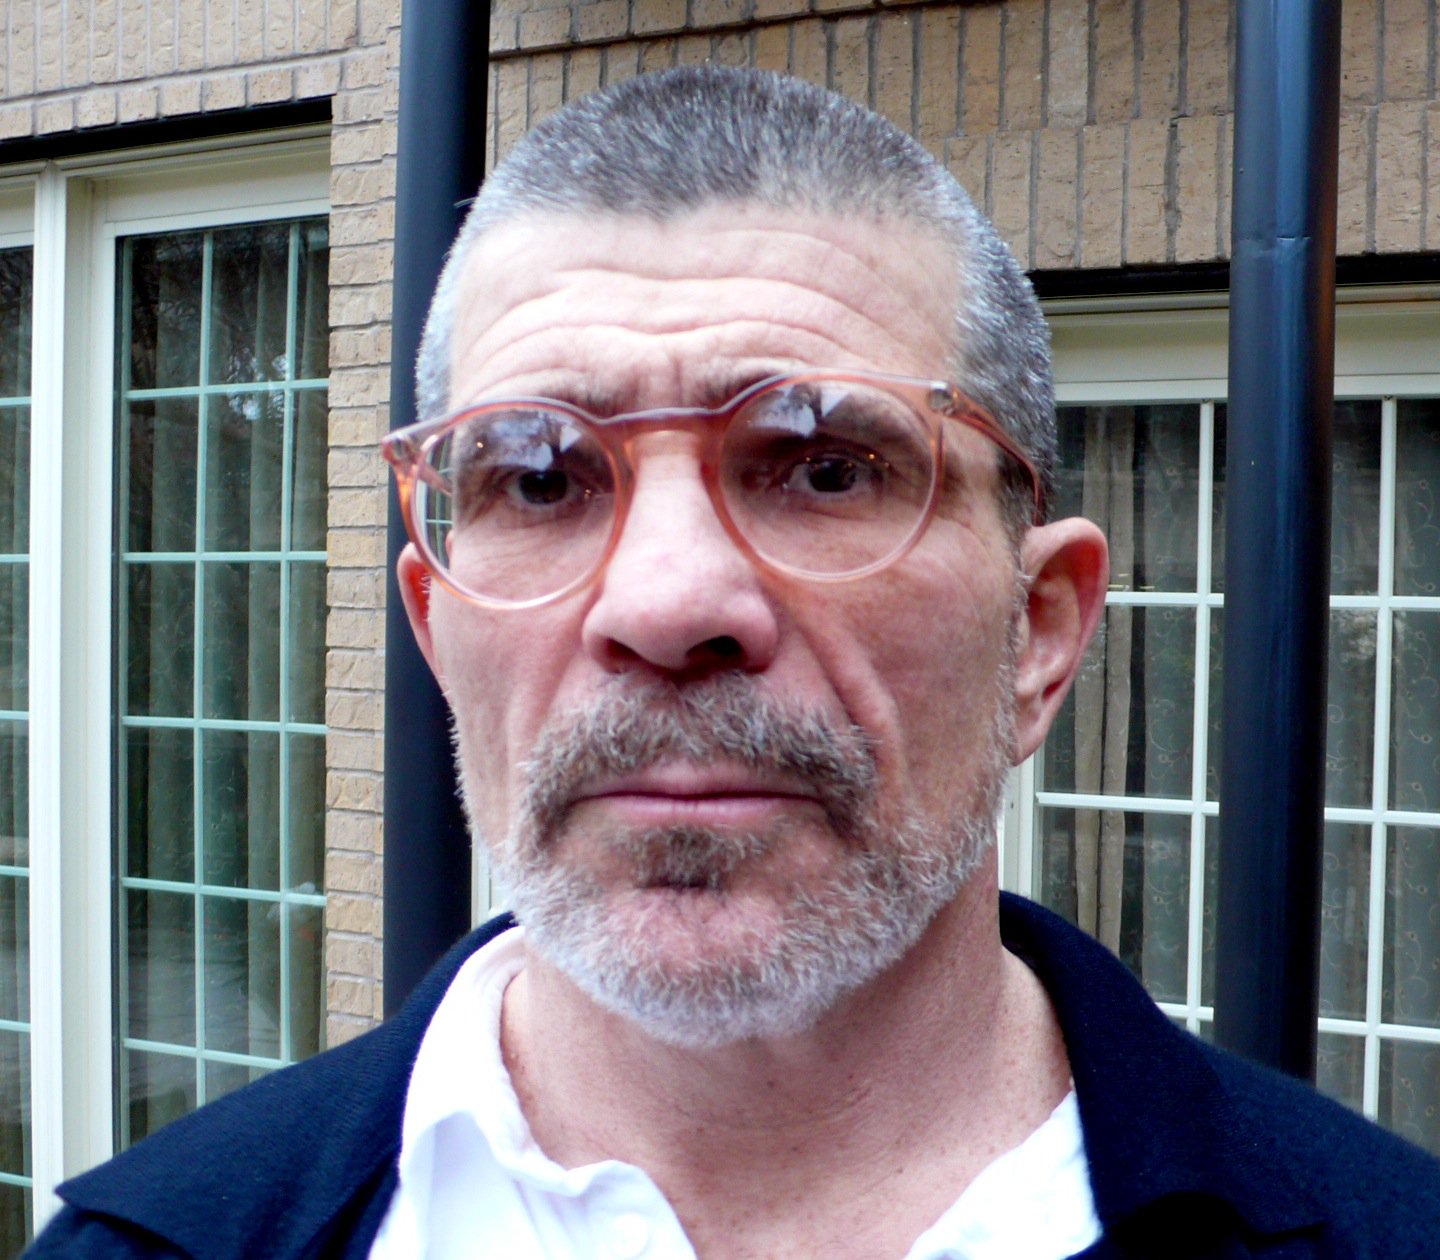 Happy birthday, David Mamet! From archives: \"Thank You for Calling Mamet s Appliance Center\"  